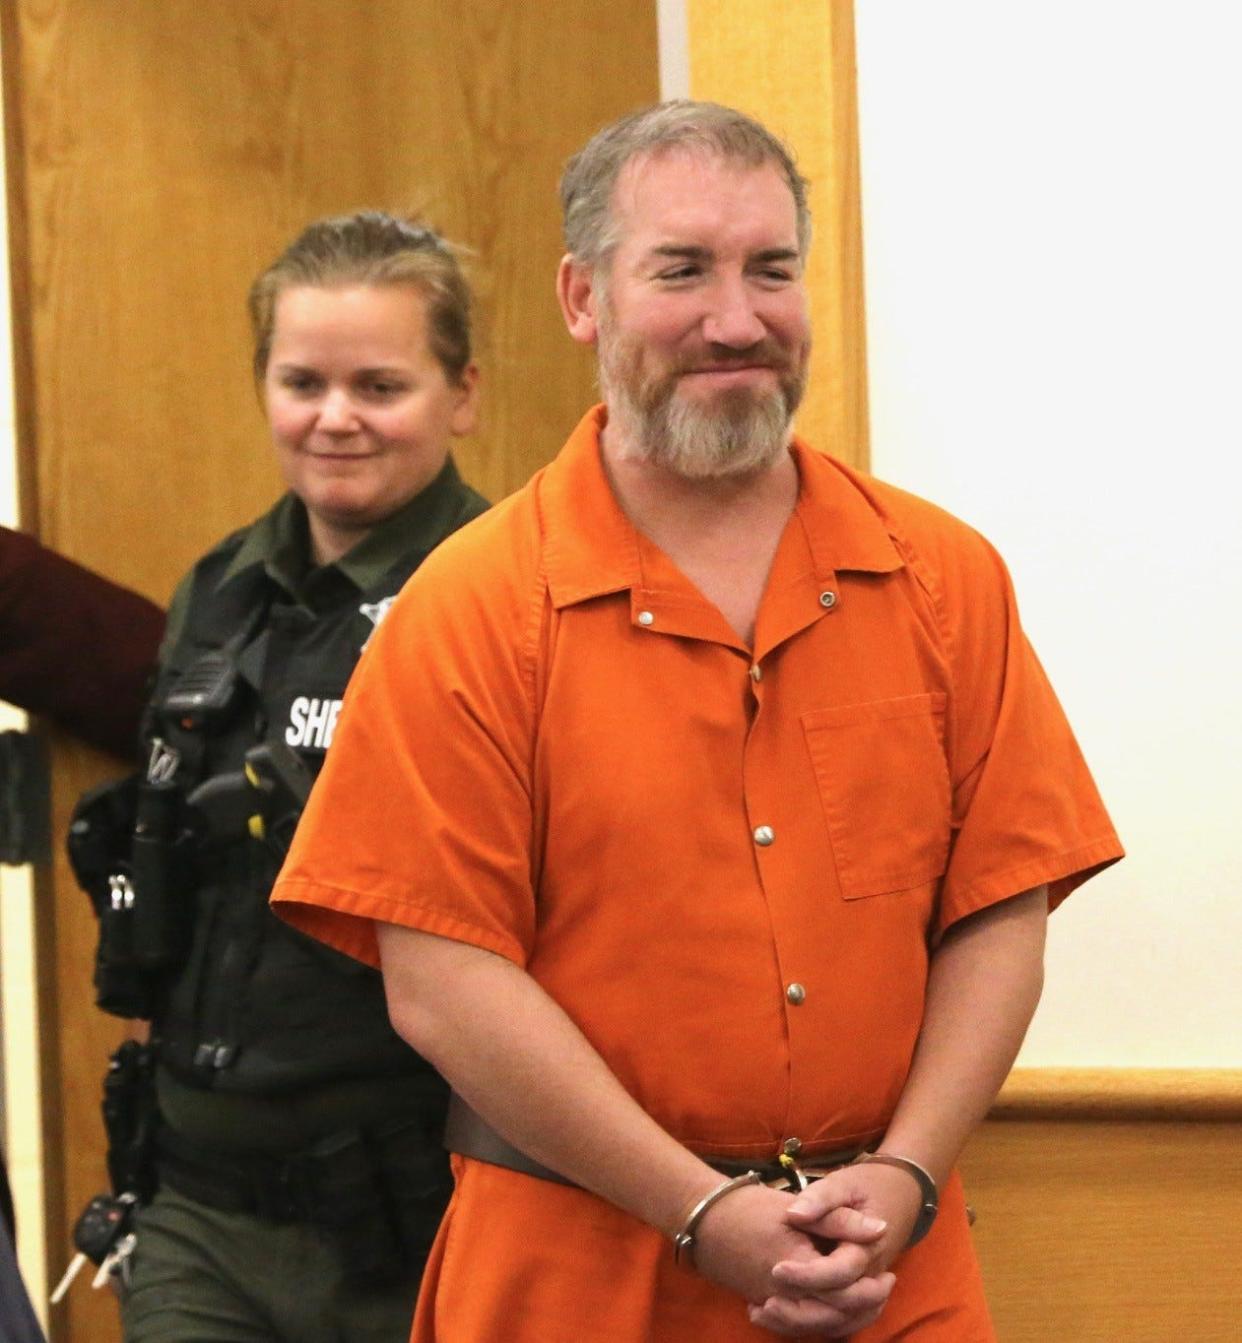 Harry Wallus, a former Portsmouth physician and part-time Greenland police officer, was sentenced to 9 months in jail Friday for assaulting his girlfriend. He is pictured in court Sept. 13 when his sentencing was originally scheduled but continued to Nov. 3.